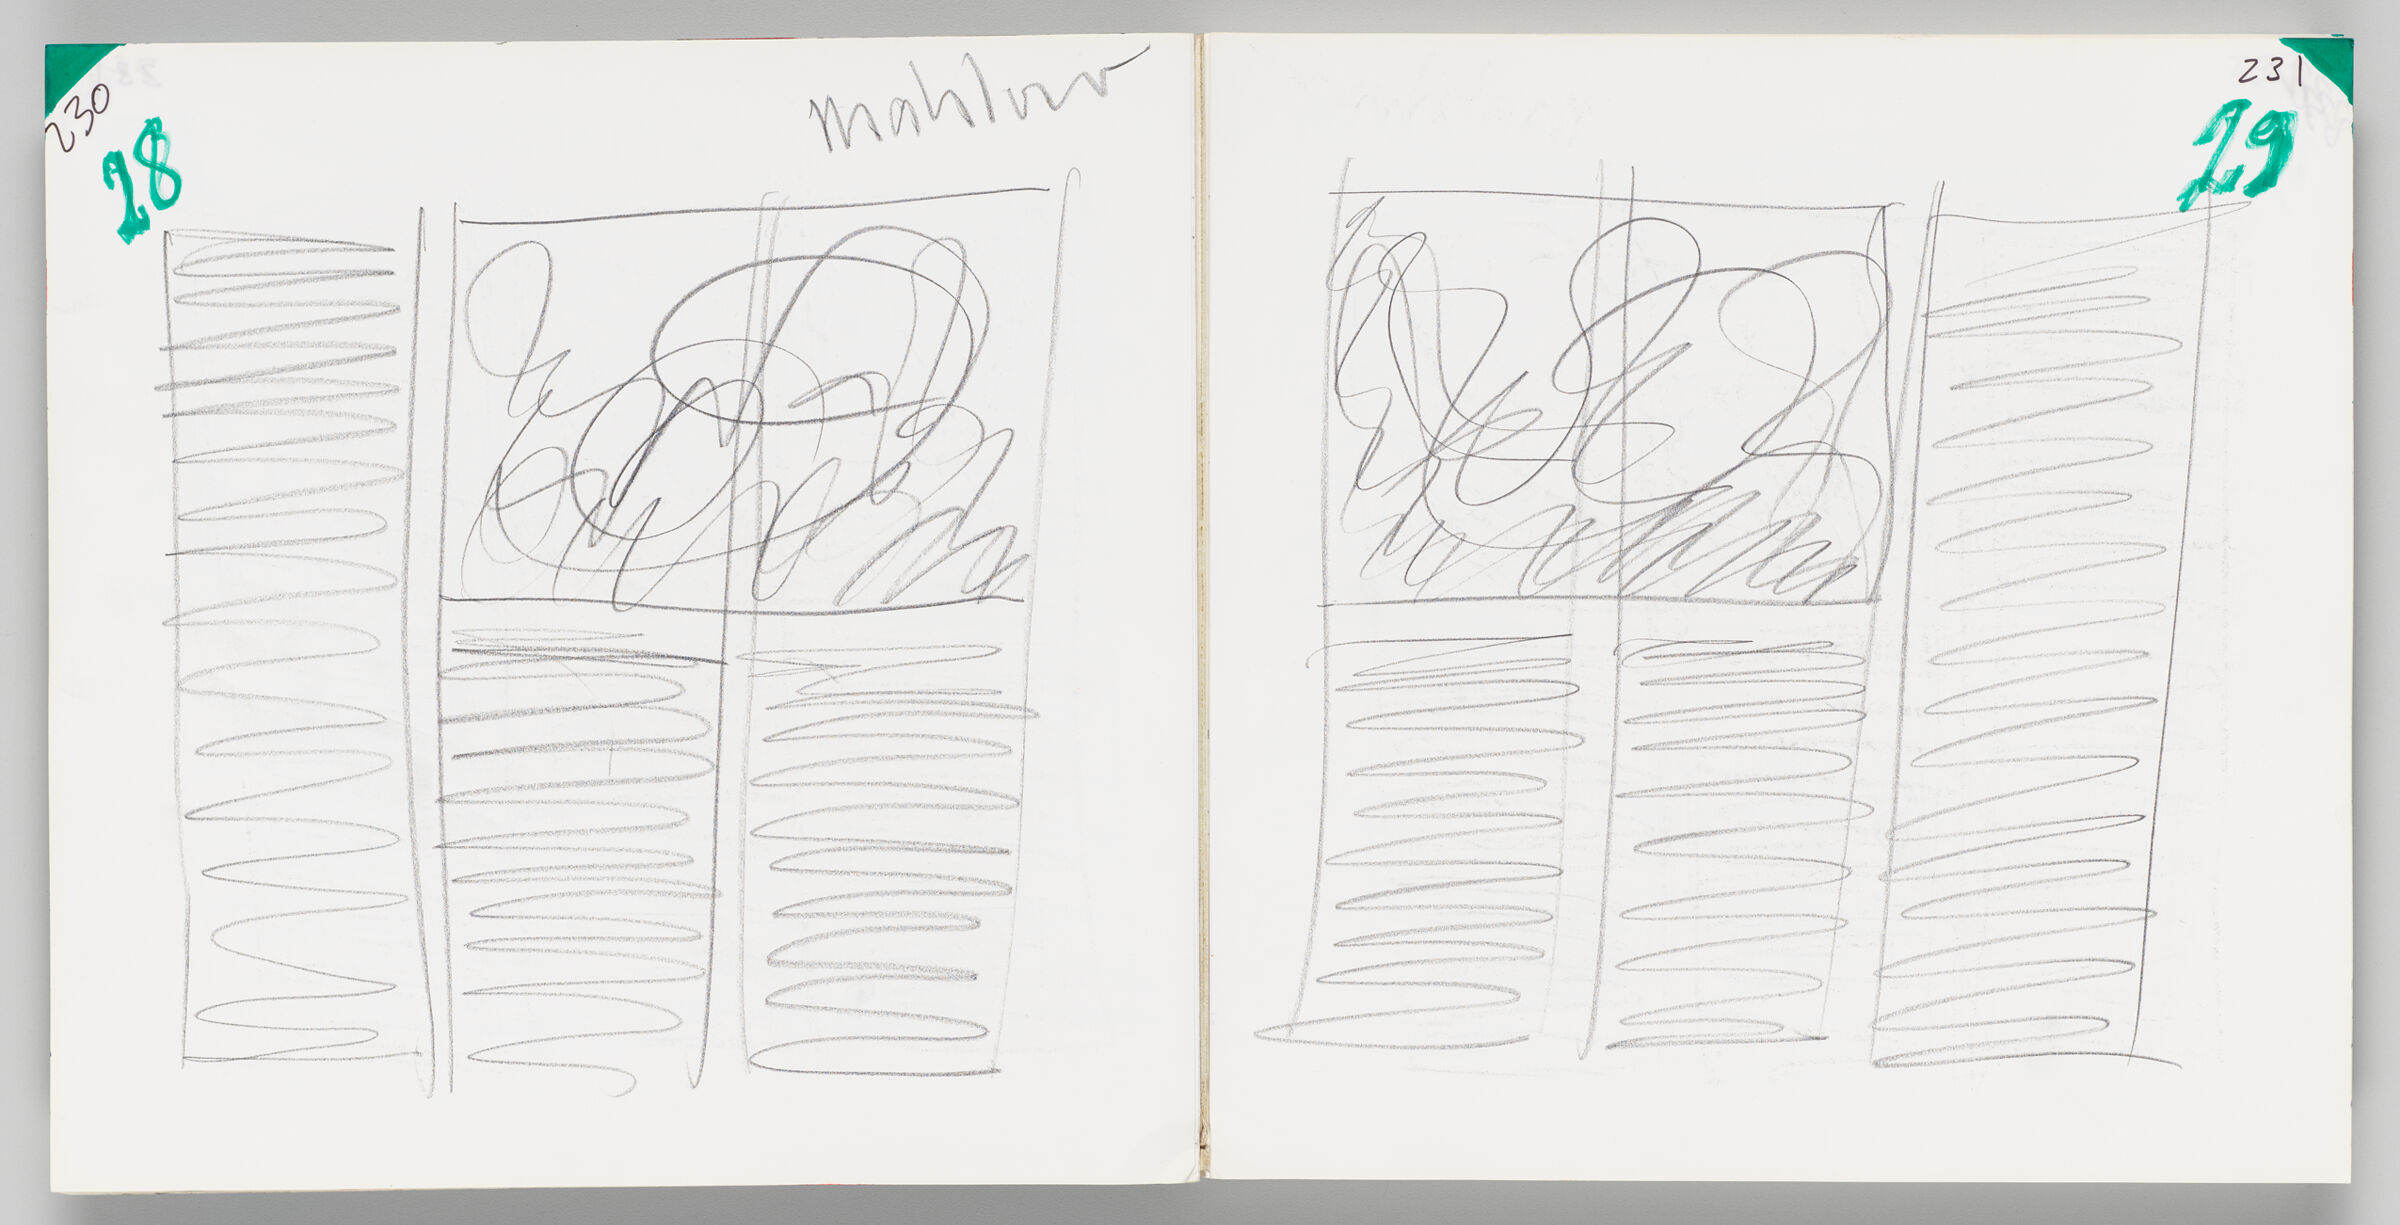 Untitled (Page Layout Design, Left Page); Untitled (Page Layout Design, Right Page)